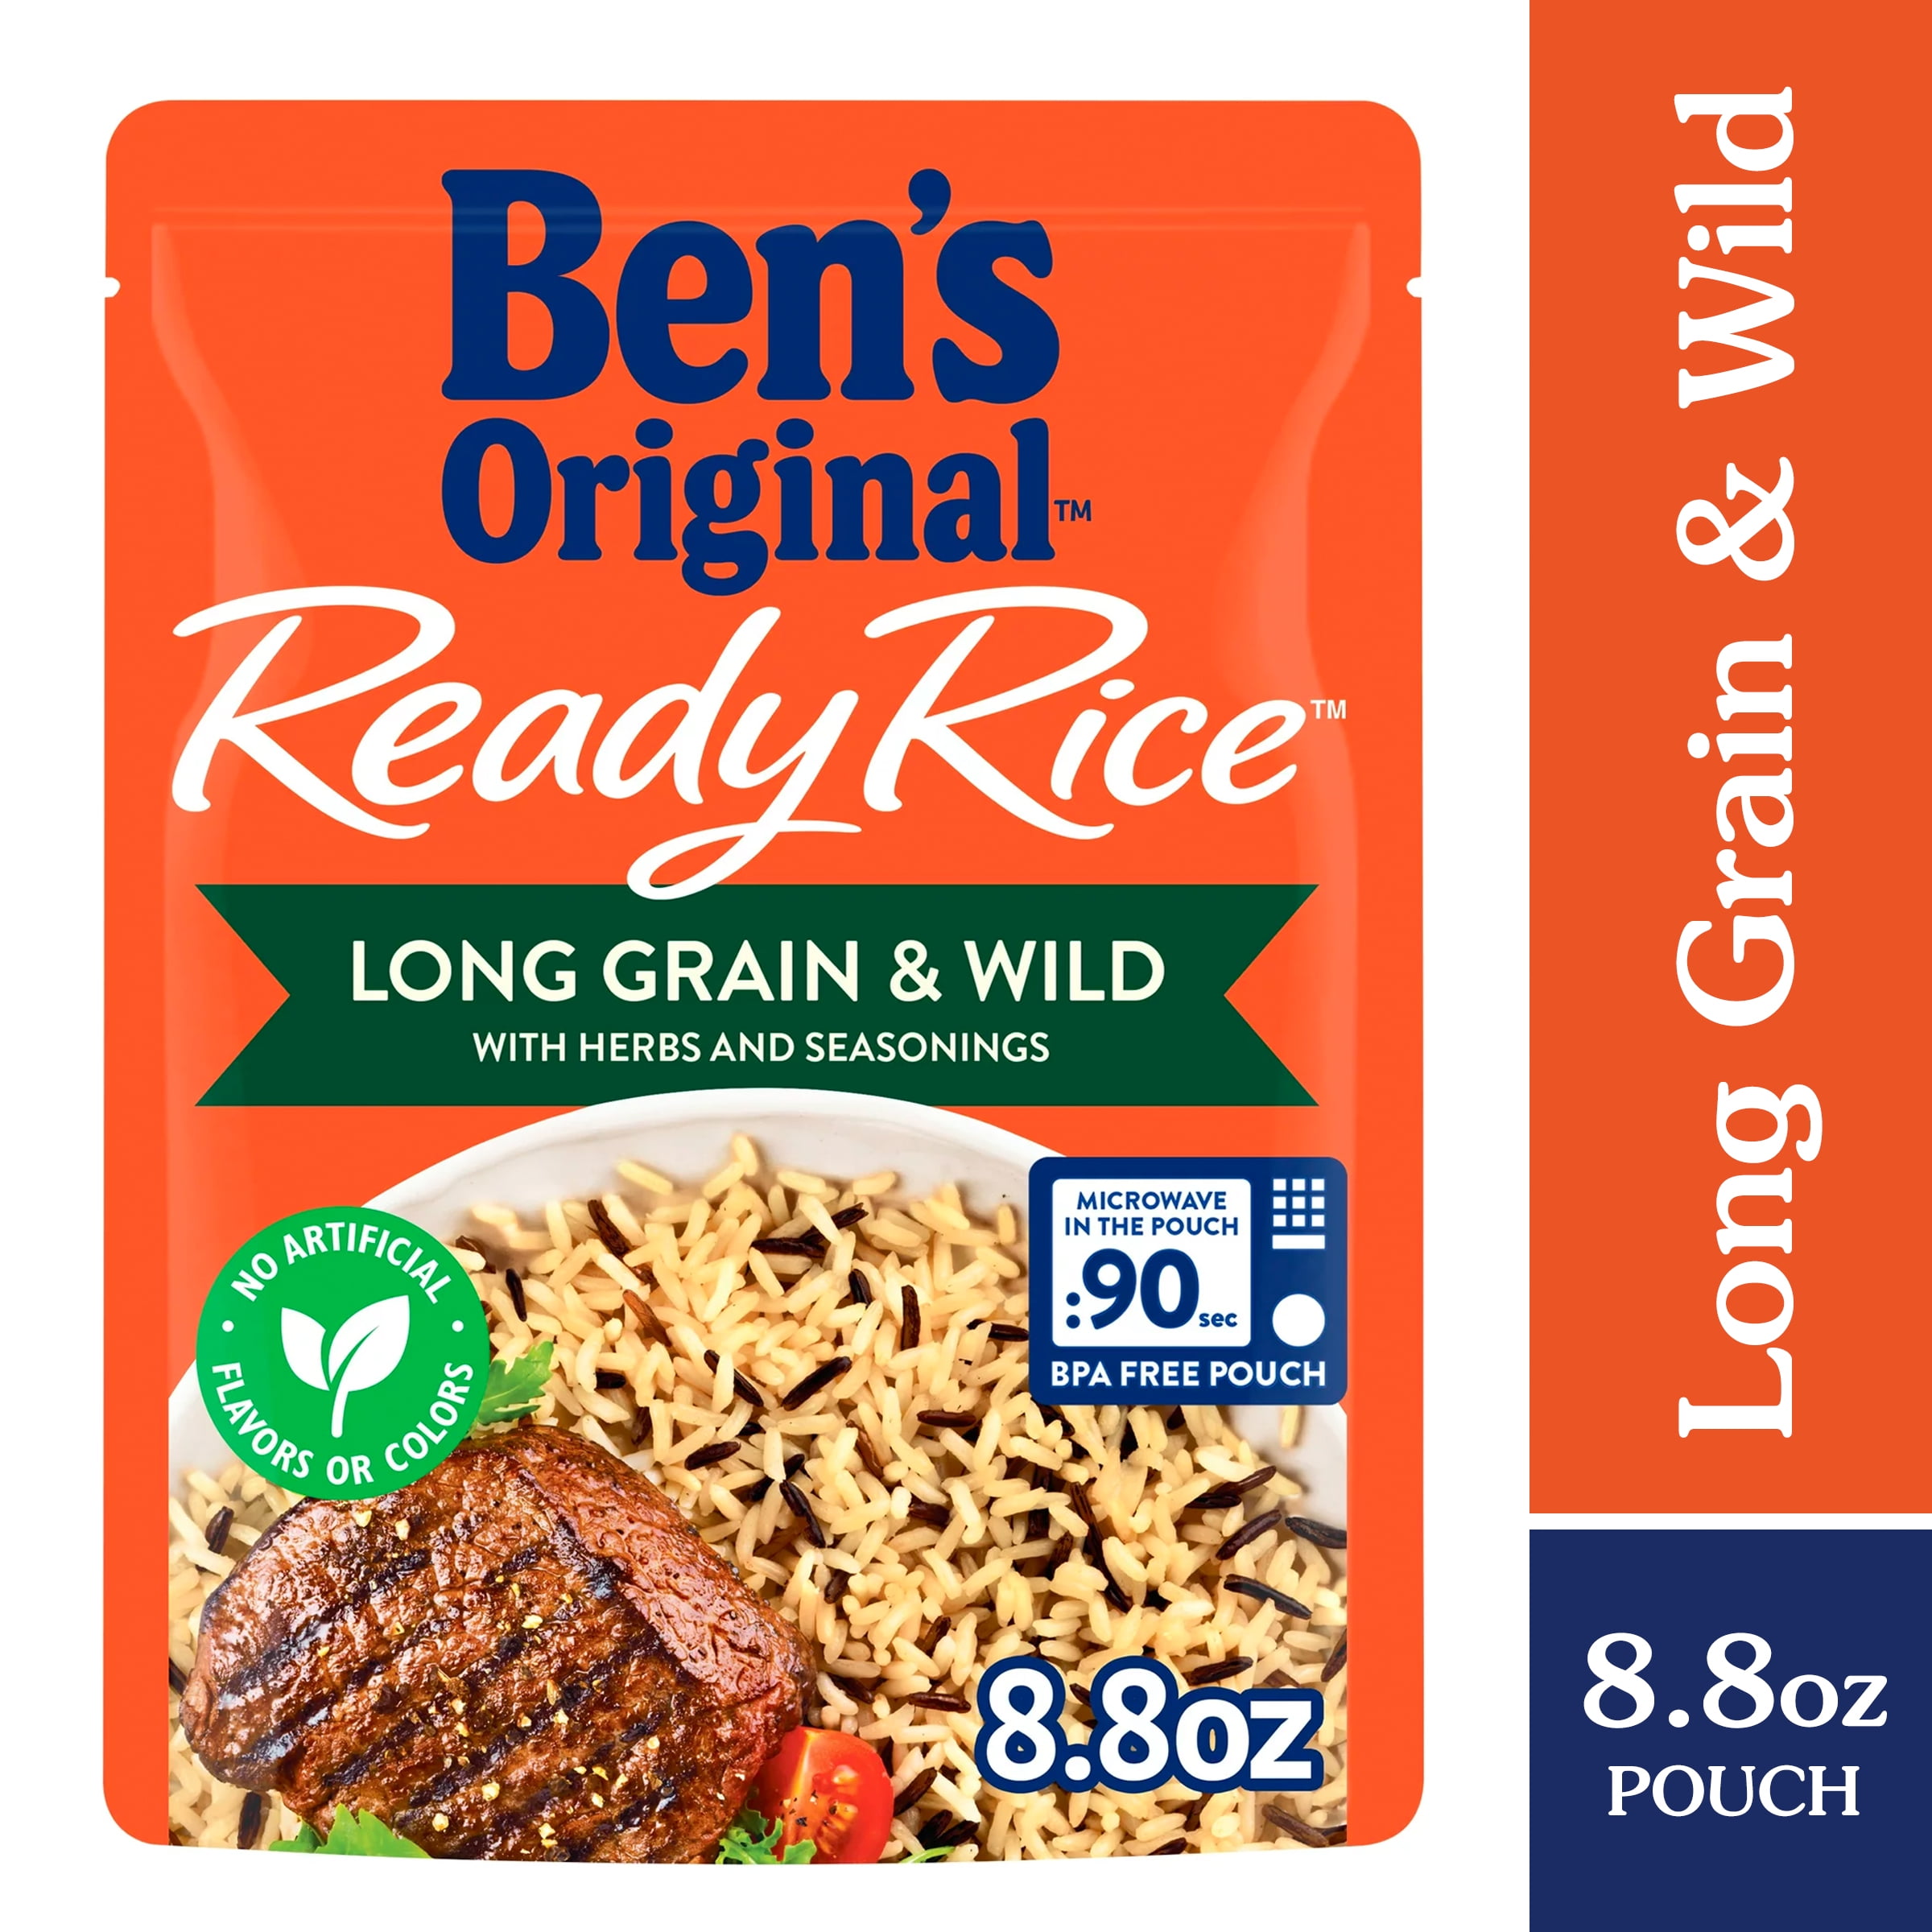 BEN'S ORIGINAL Ready Rice Long Grain and Wild Flavored Rice, Easy Dinner Side, 8.8 OZ Pouch